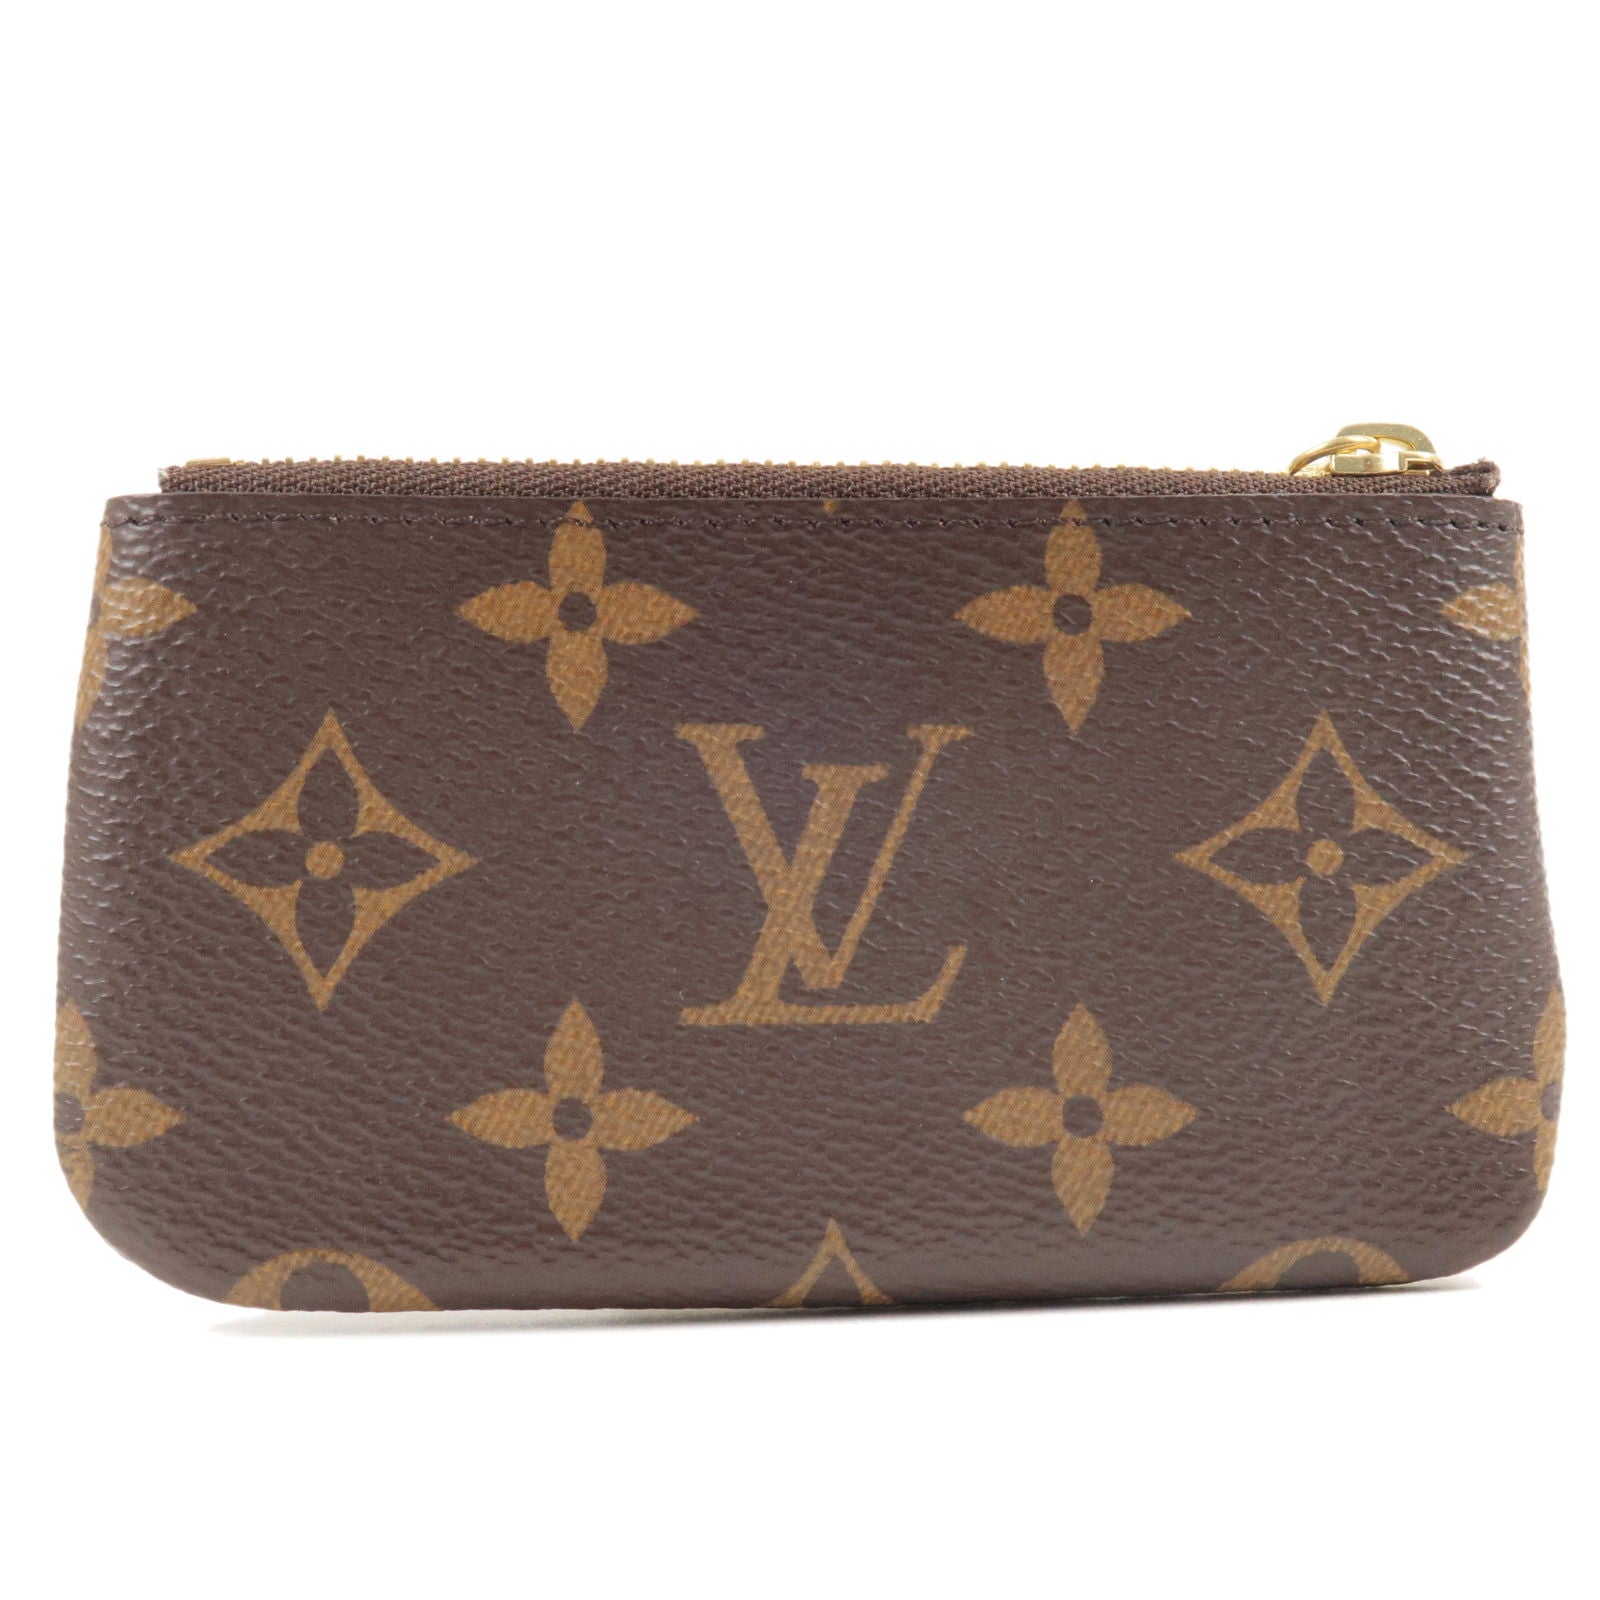 LOUIS VUITTON KEY HOLDER Review (Bahasa Indonesia) 